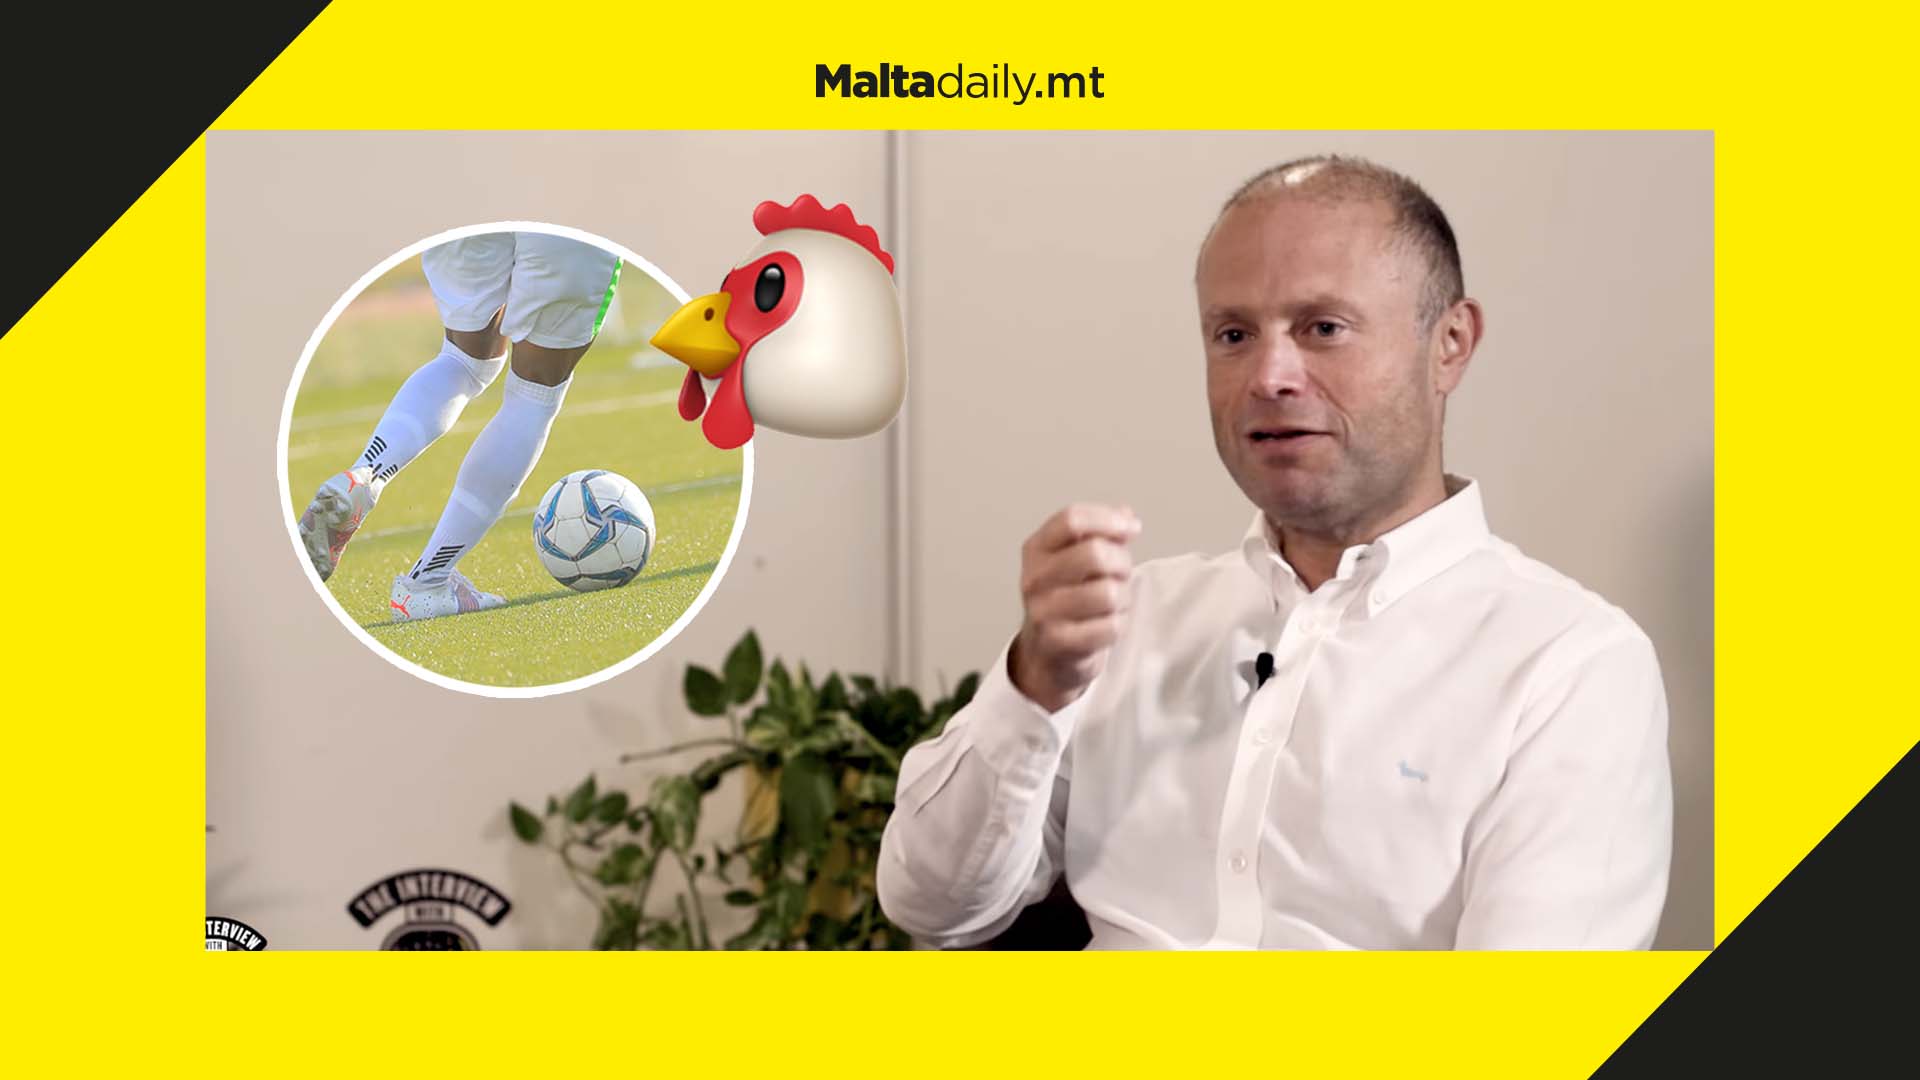 Malta Premier League teams 'are like chickens when it comes to working together' - Muscat